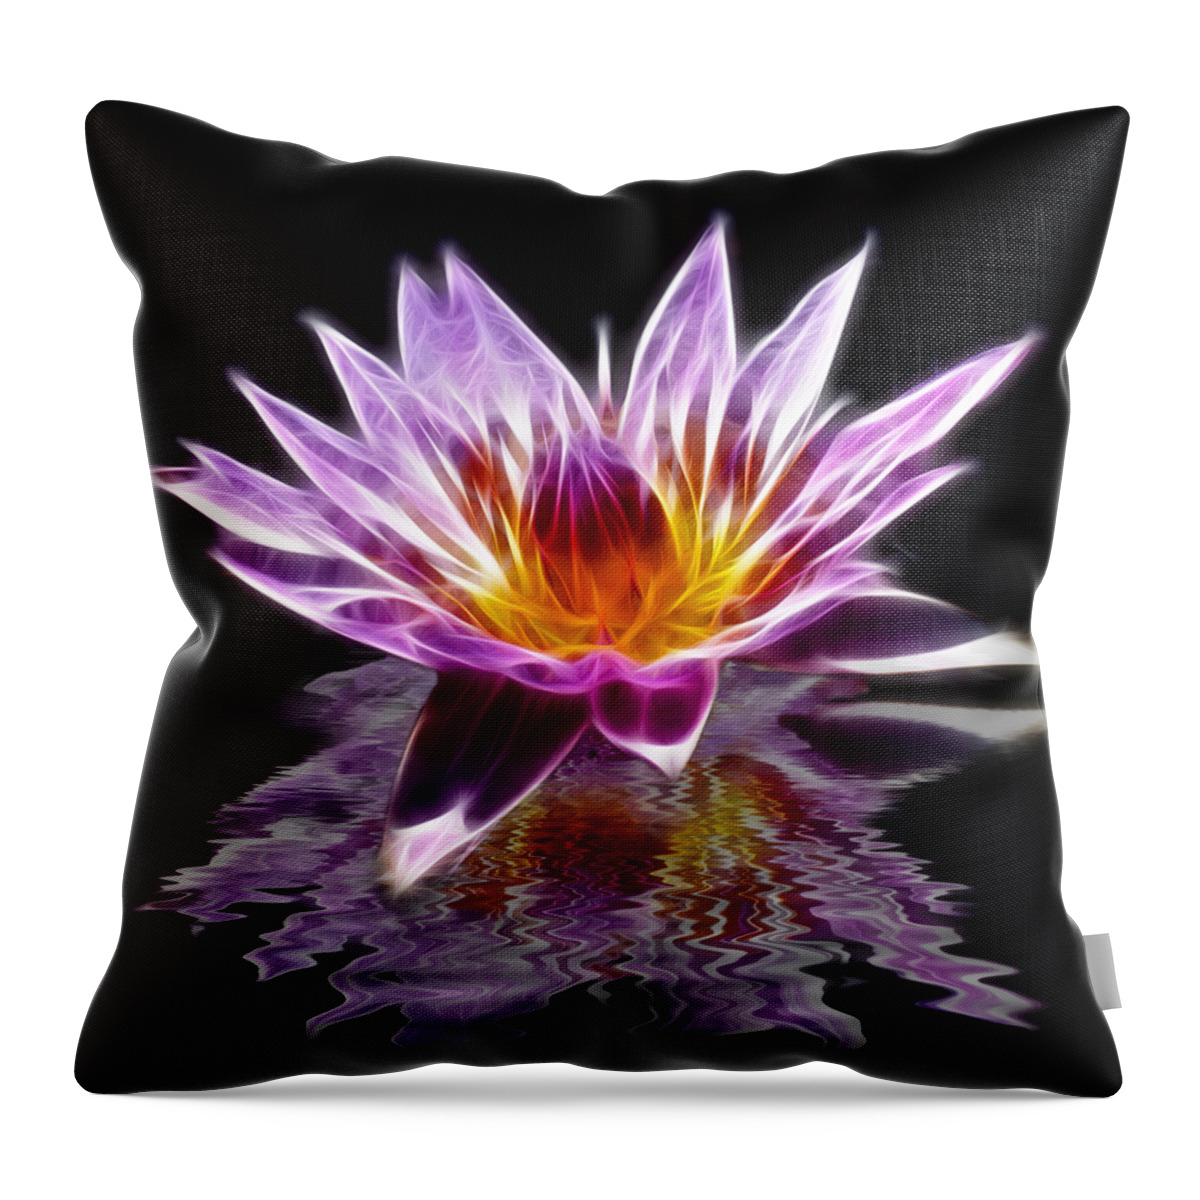 Lilly Throw Pillow featuring the photograph Glowing Lilly Flower by Shane Bechler